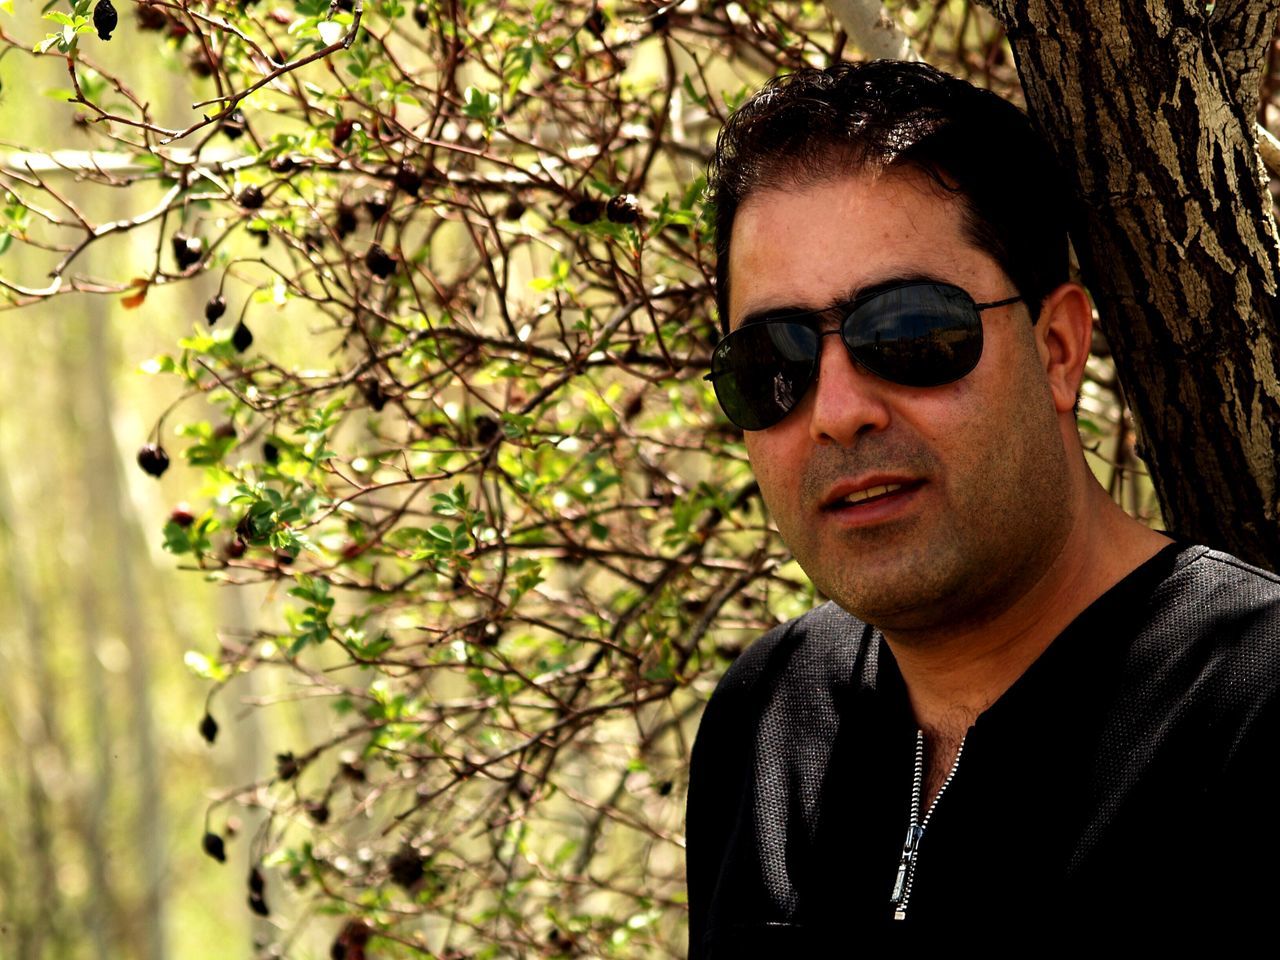 young adult, portrait, looking at camera, headshot, person, front view, lifestyles, young men, close-up, leisure activity, human face, head and shoulders, sunglasses, serious, focus on foreground, mid adult, tree